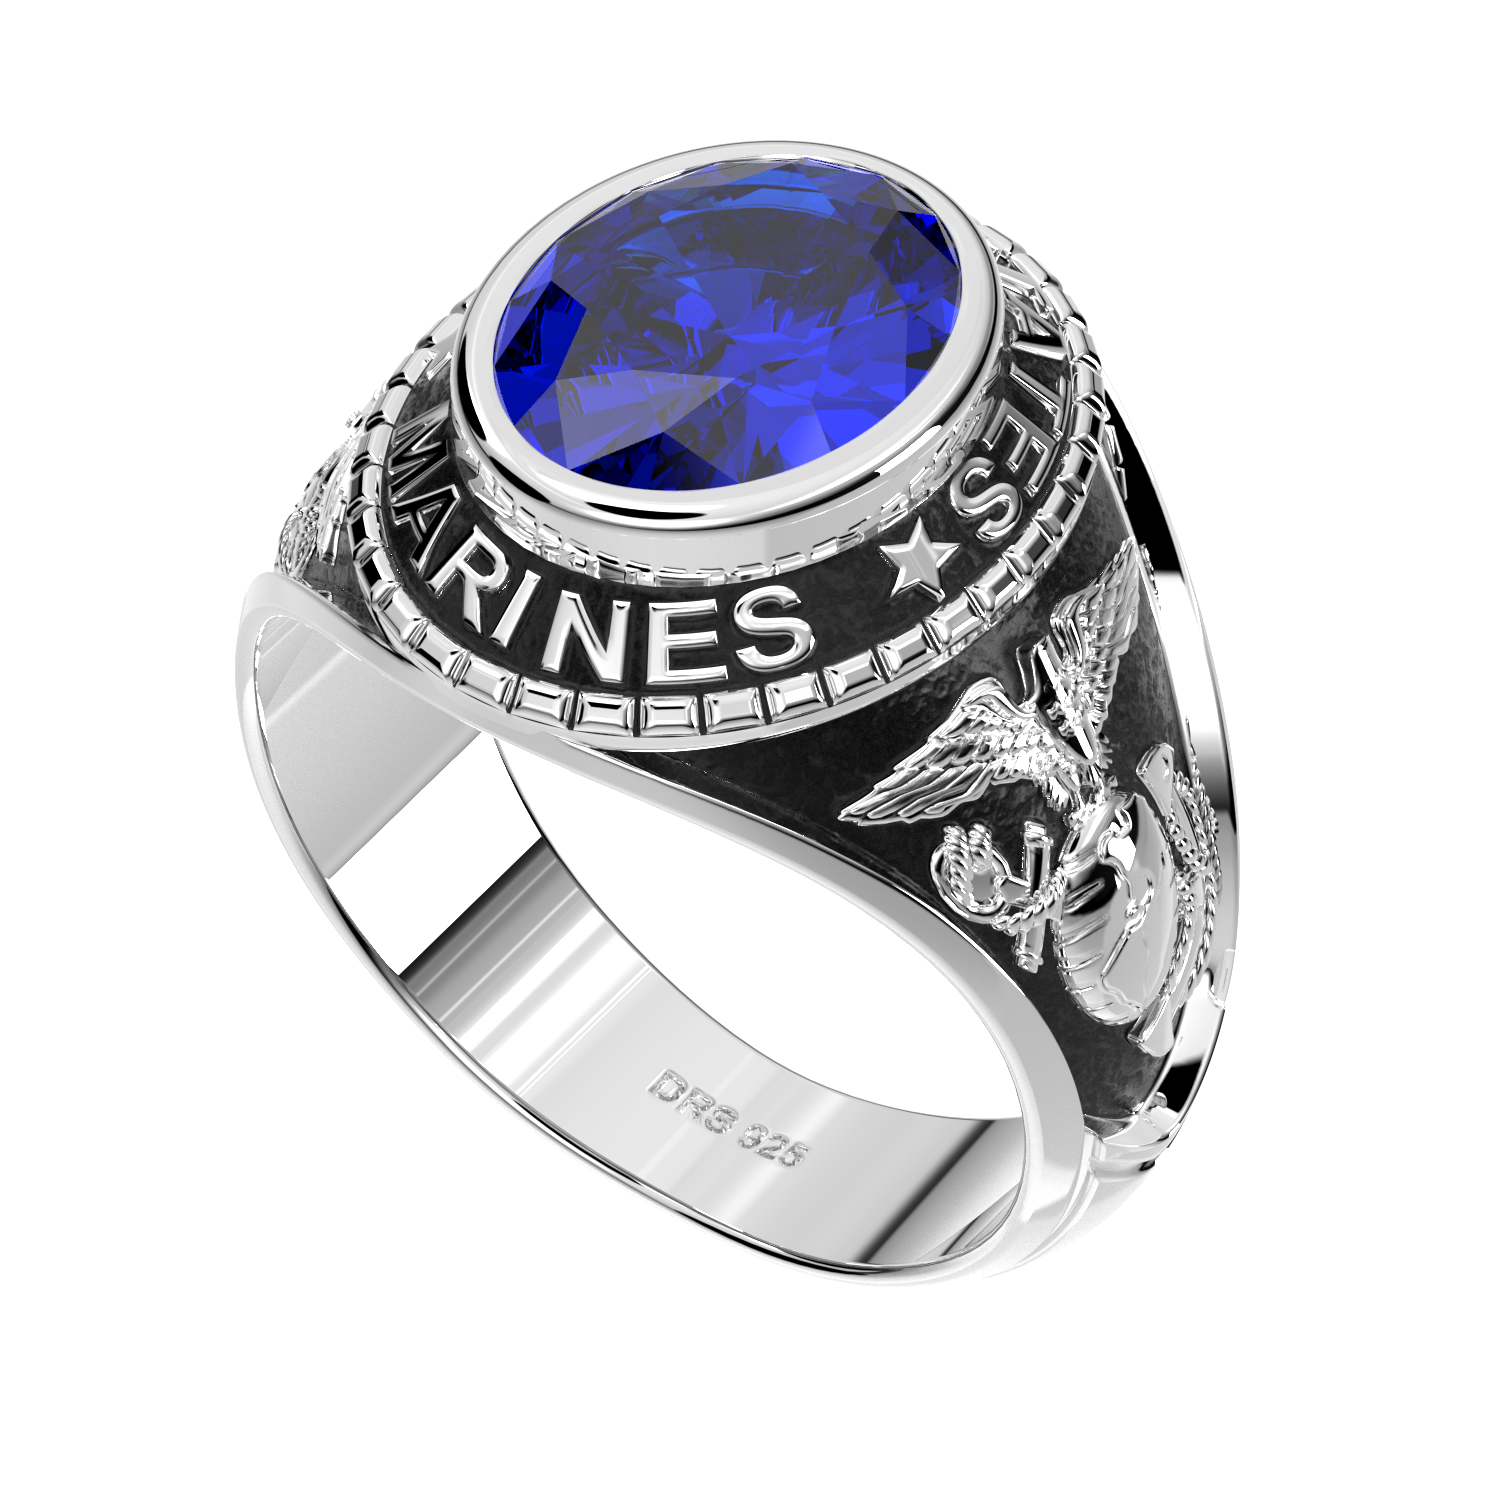 Mens Real Solid 925 Sterling Silver Dark Navy Blue Sapphire Stone